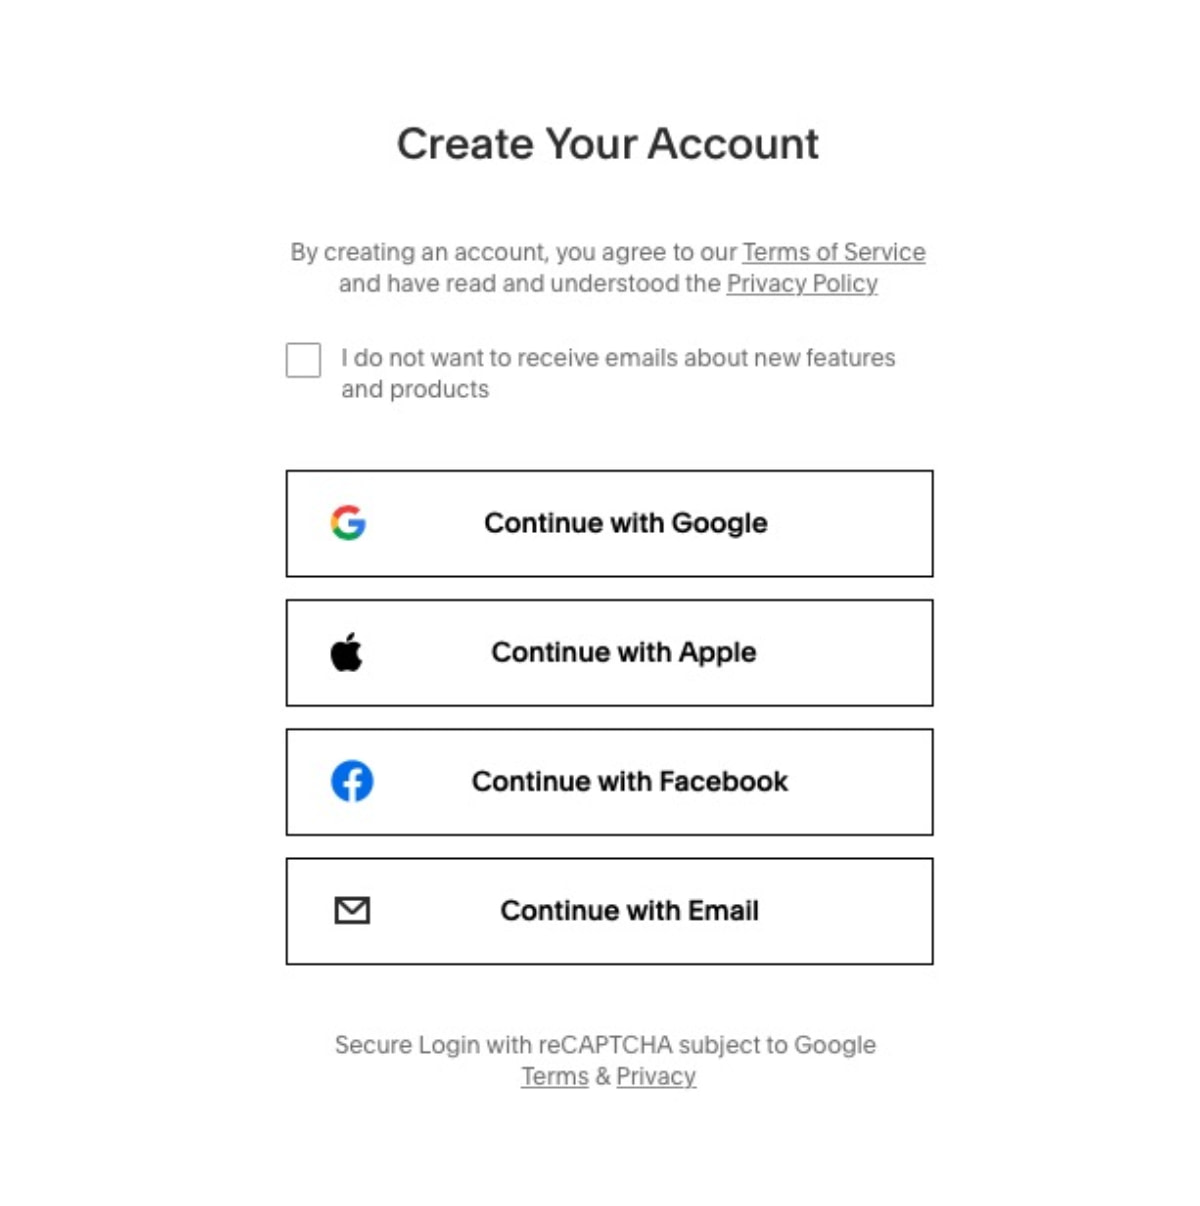 The Squarespace signup options